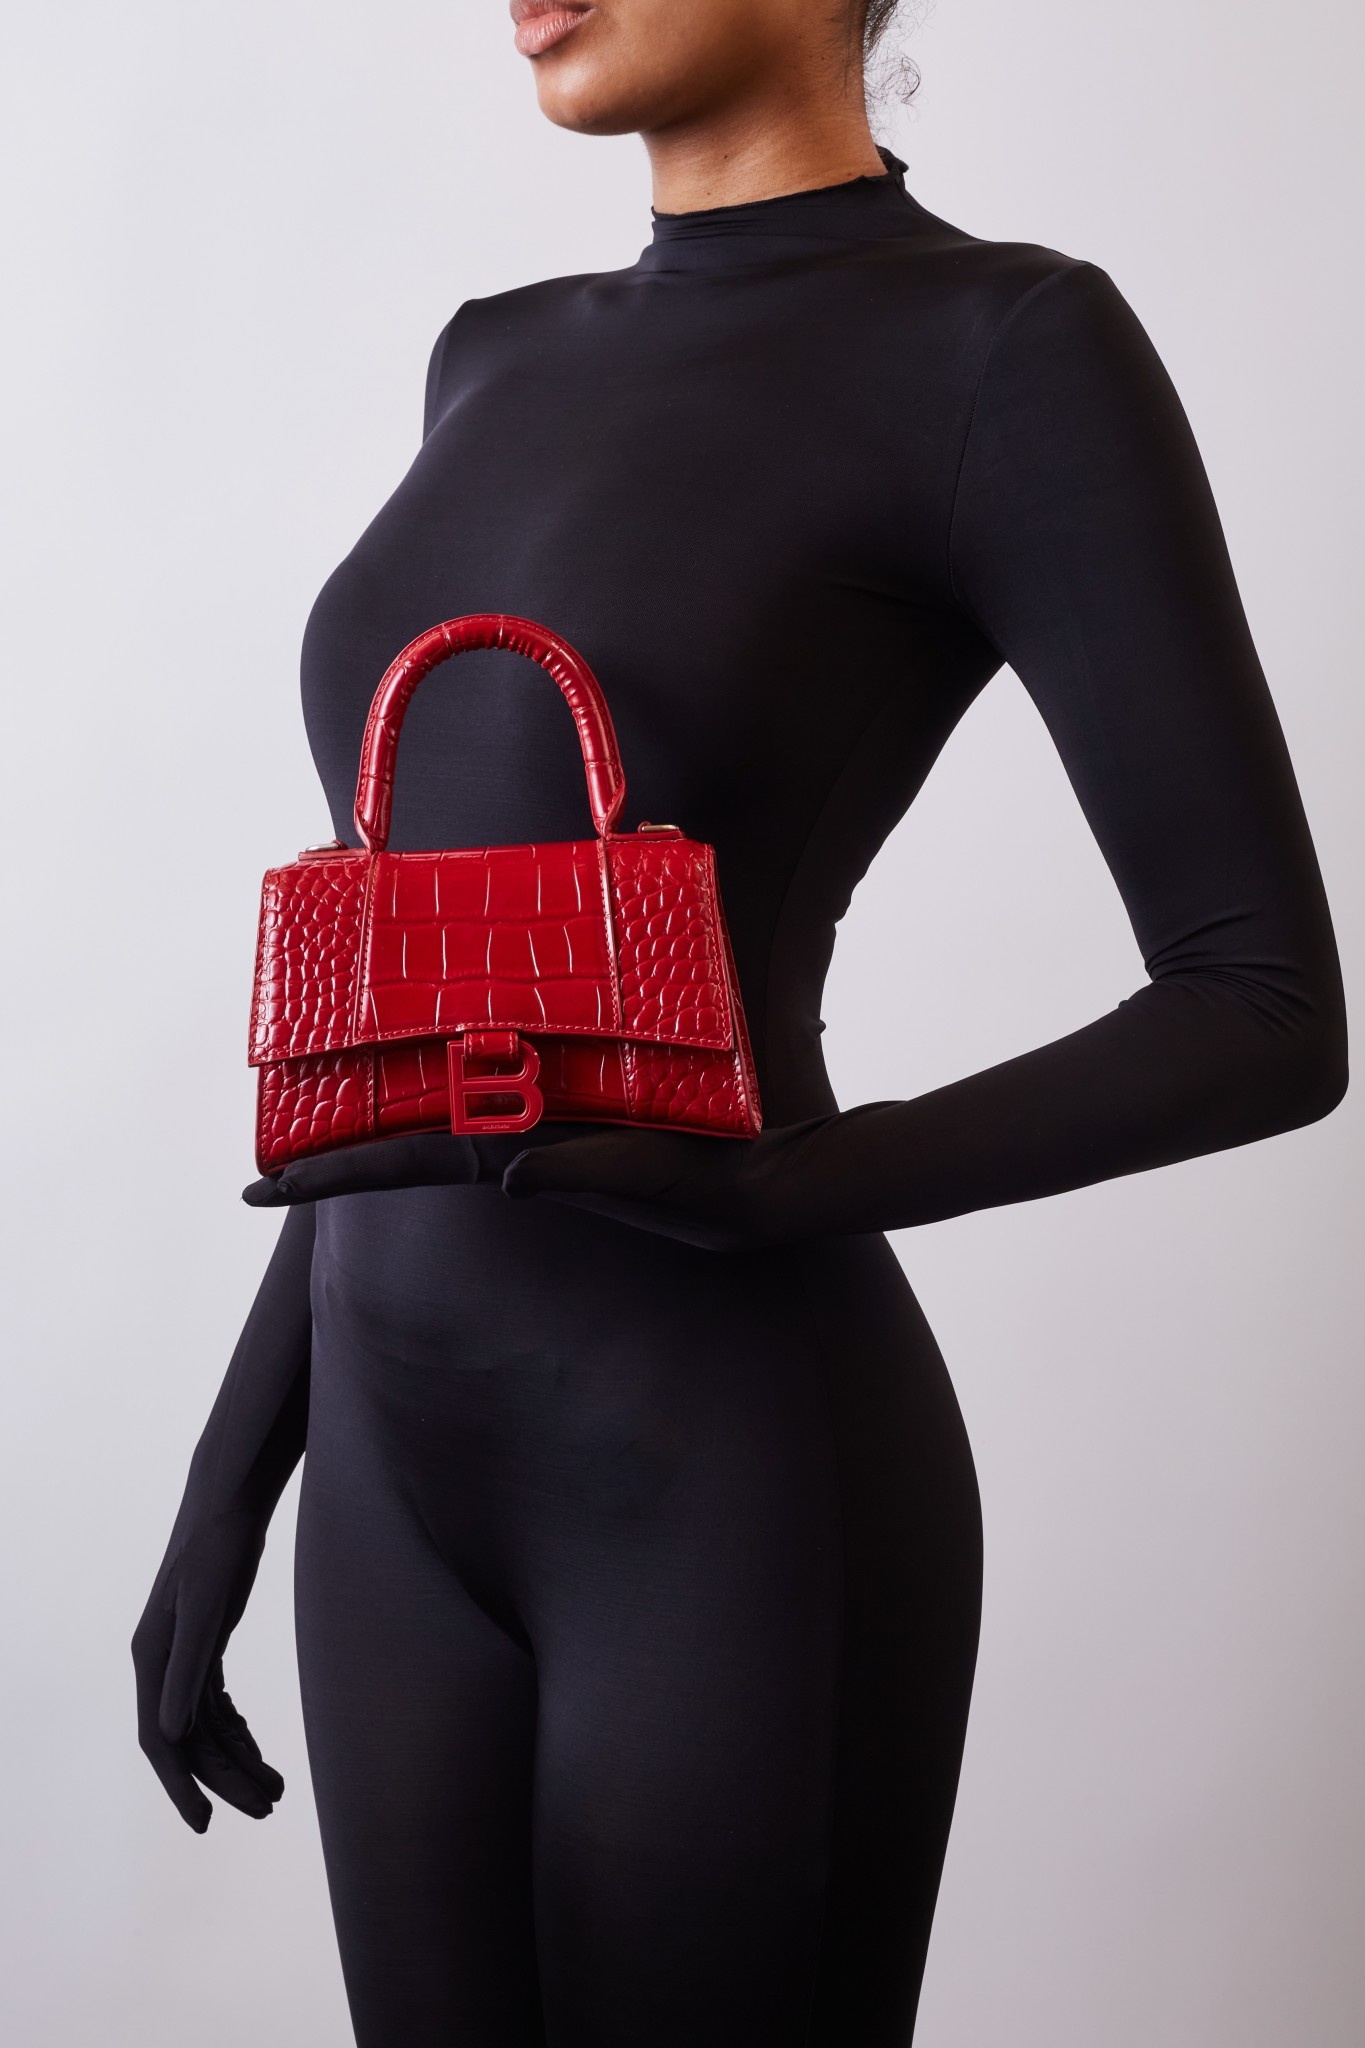 Red Hourglass S crocodile-effect leather bag